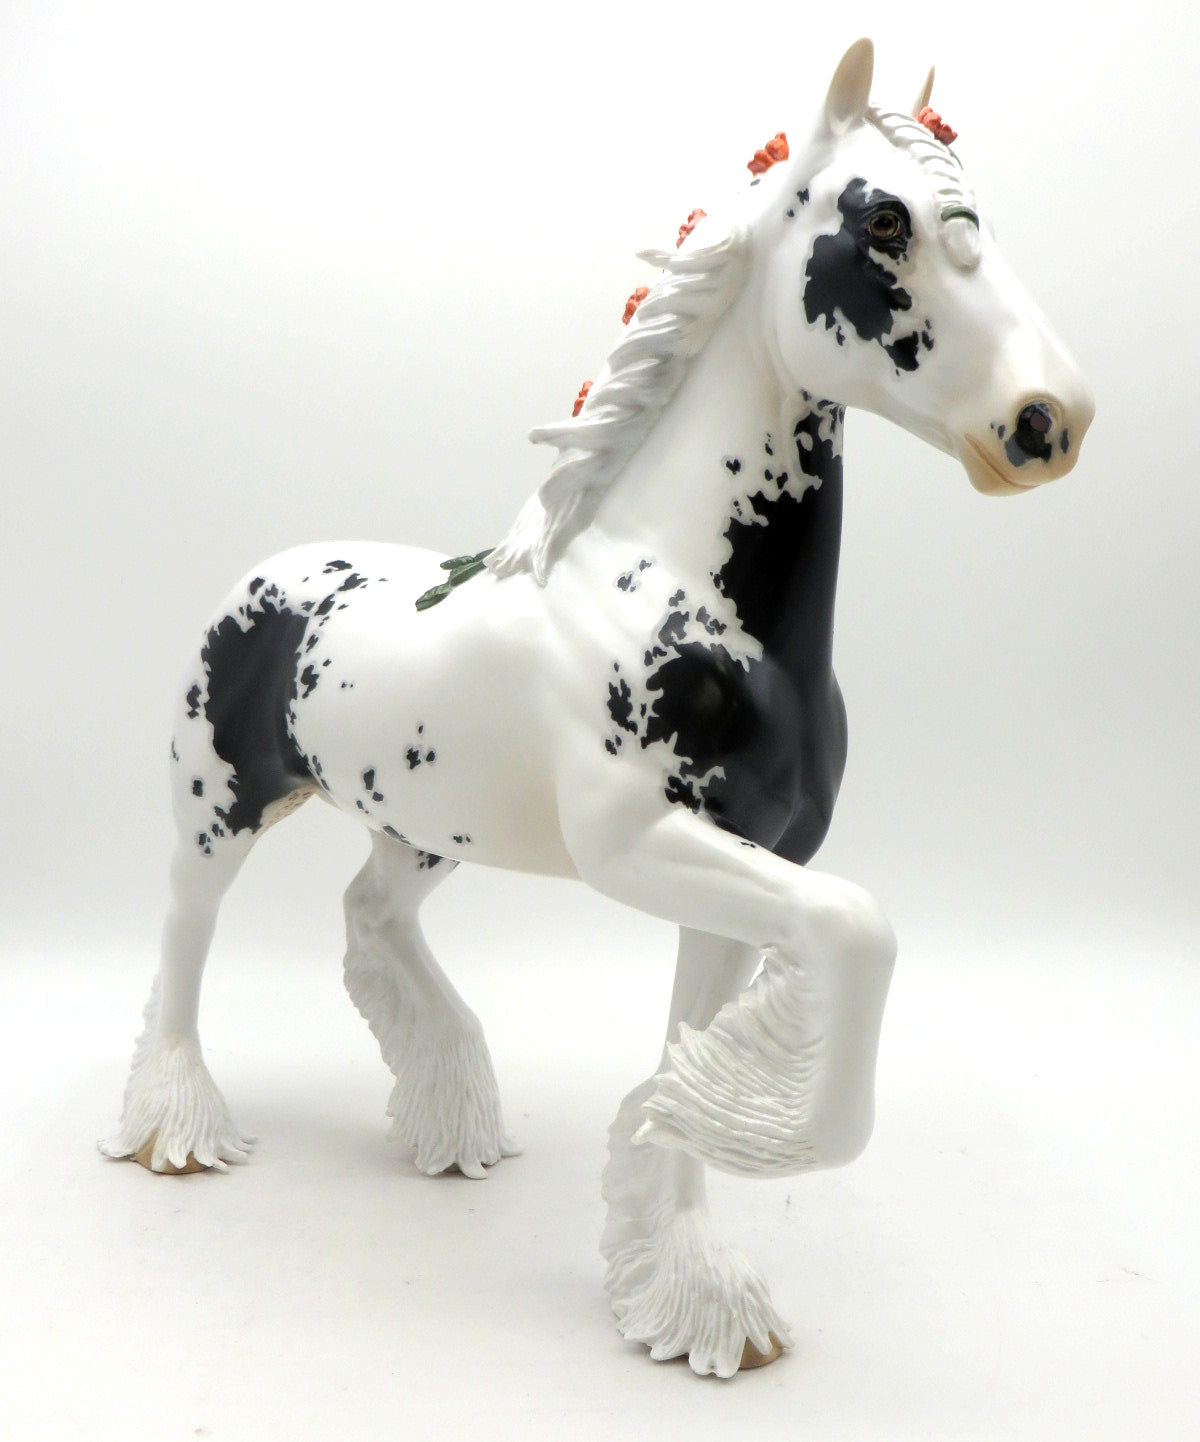 Aengus Og-OOAK Pinto Trotting Drafter Painted by Jess EQ 22